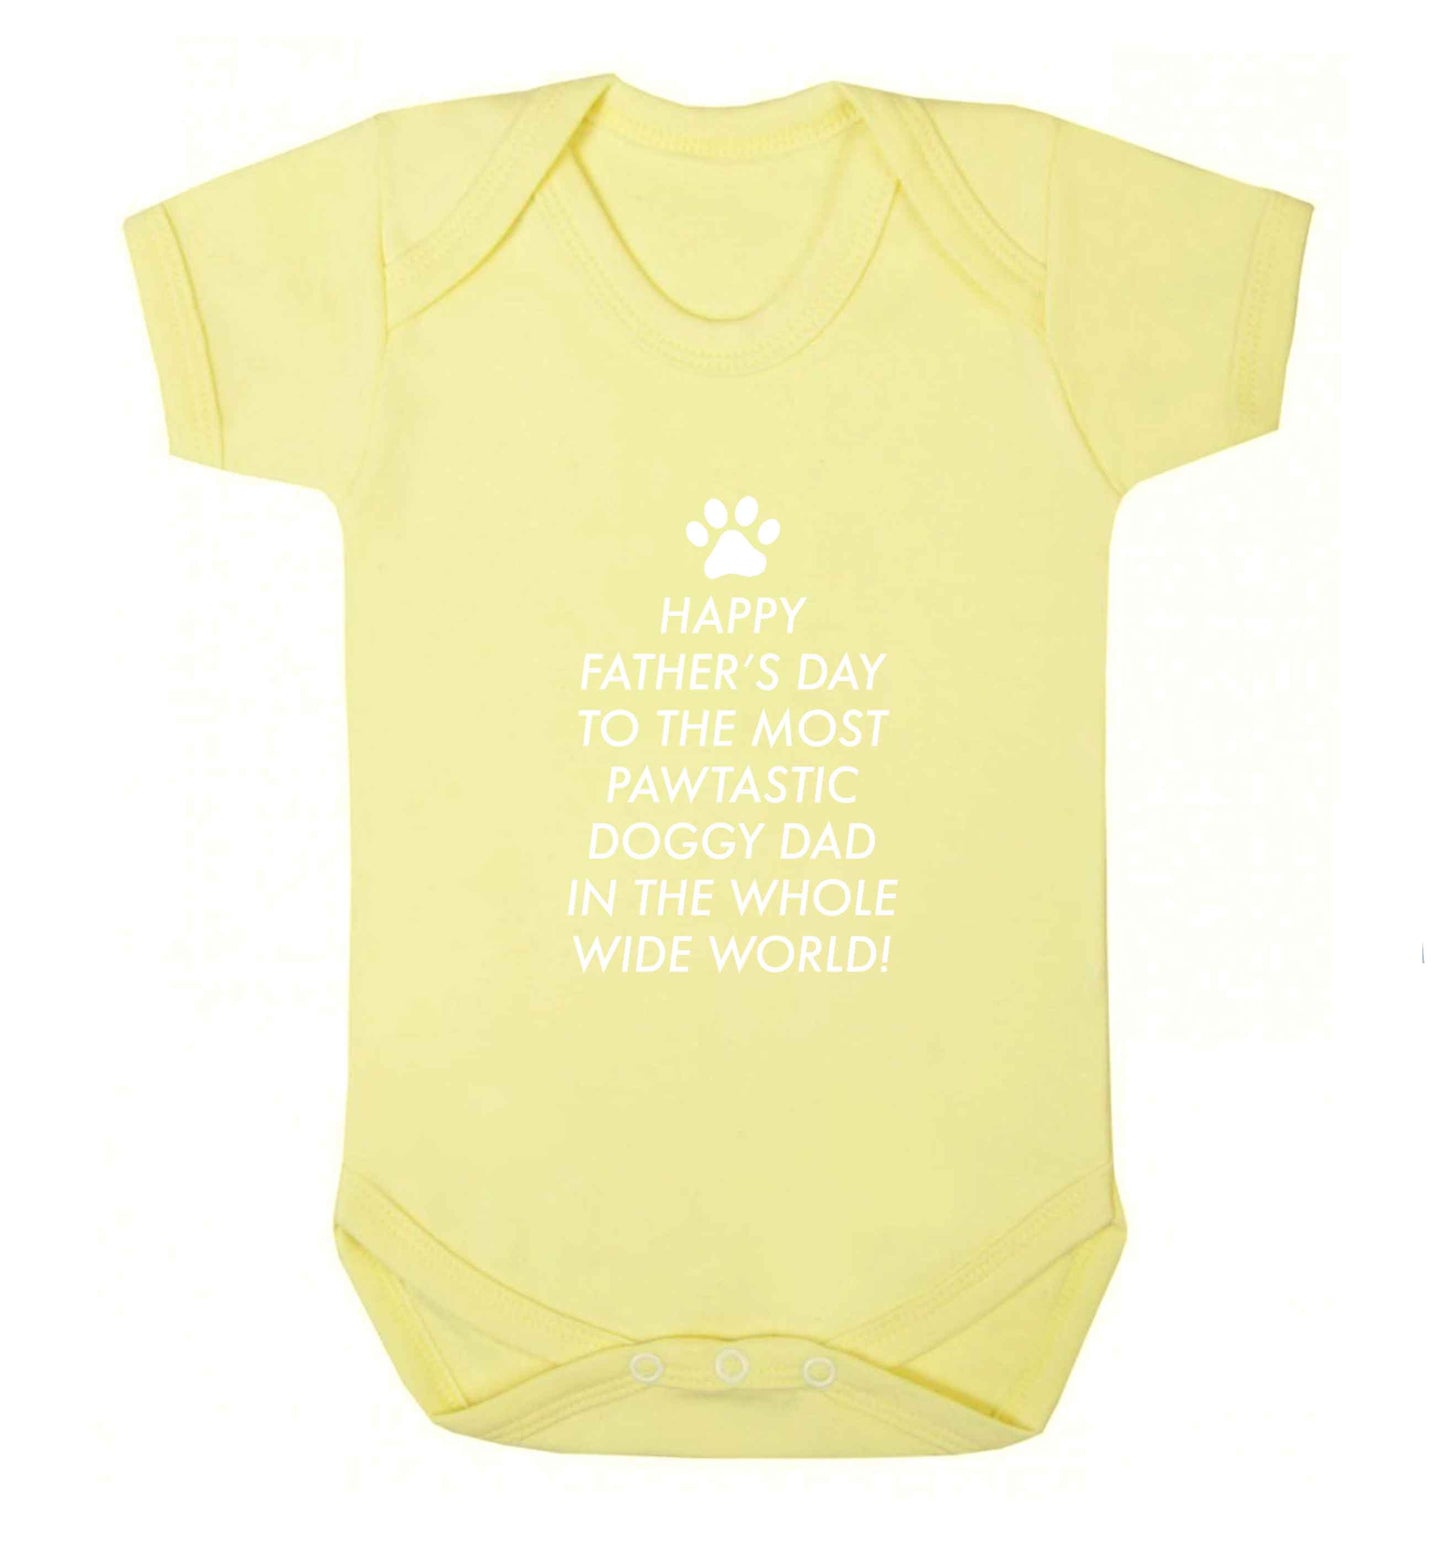 Happy Father's day to the most pawtastic doggy dad in the whole wide world!baby vest pale yellow 18-24 months